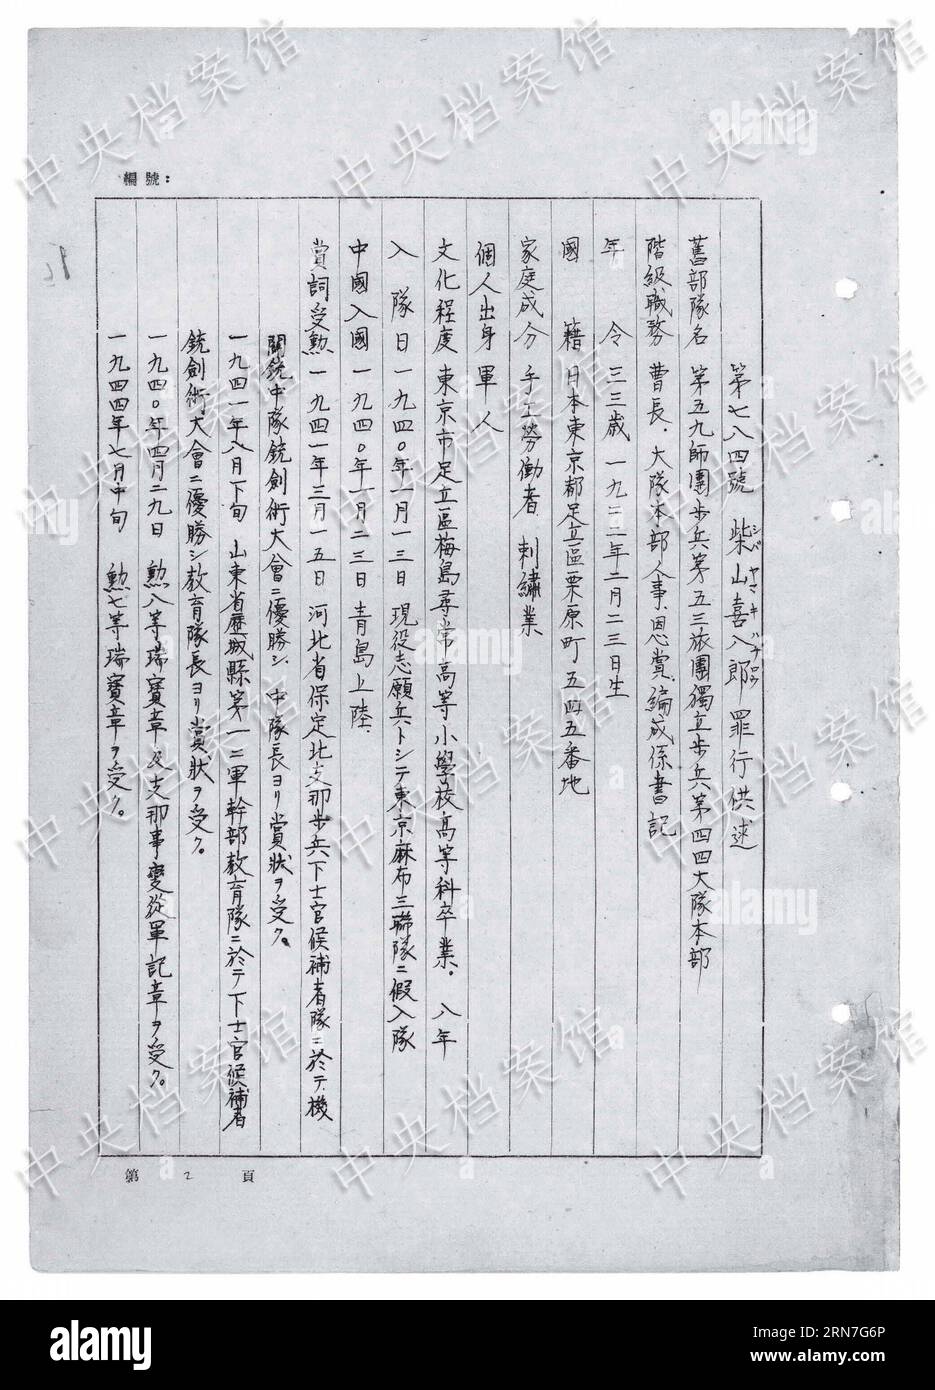 (150905) -- BEIJING, Sept. 5, 2015 () -- Photo released on Sept. 5, 2015 by the State Archives Administration of China on its website shows an excerpt from Japanese war criminal Kihachiro Sibayama s written confession. Born in Japan in 1922, Sibayama joined the Japanese invasion in 1940 and was captured in August 1945. According to the confession by Kihachiro Sibayama, in May 1940 in Shandong Province, the Japanese soldier shot 30 bullets at Chinese people of about 40 to 50 years old who were carrying shoulder poles and walking, in order to test the effectiveness of the heavy machine gun, thus Stock Photo